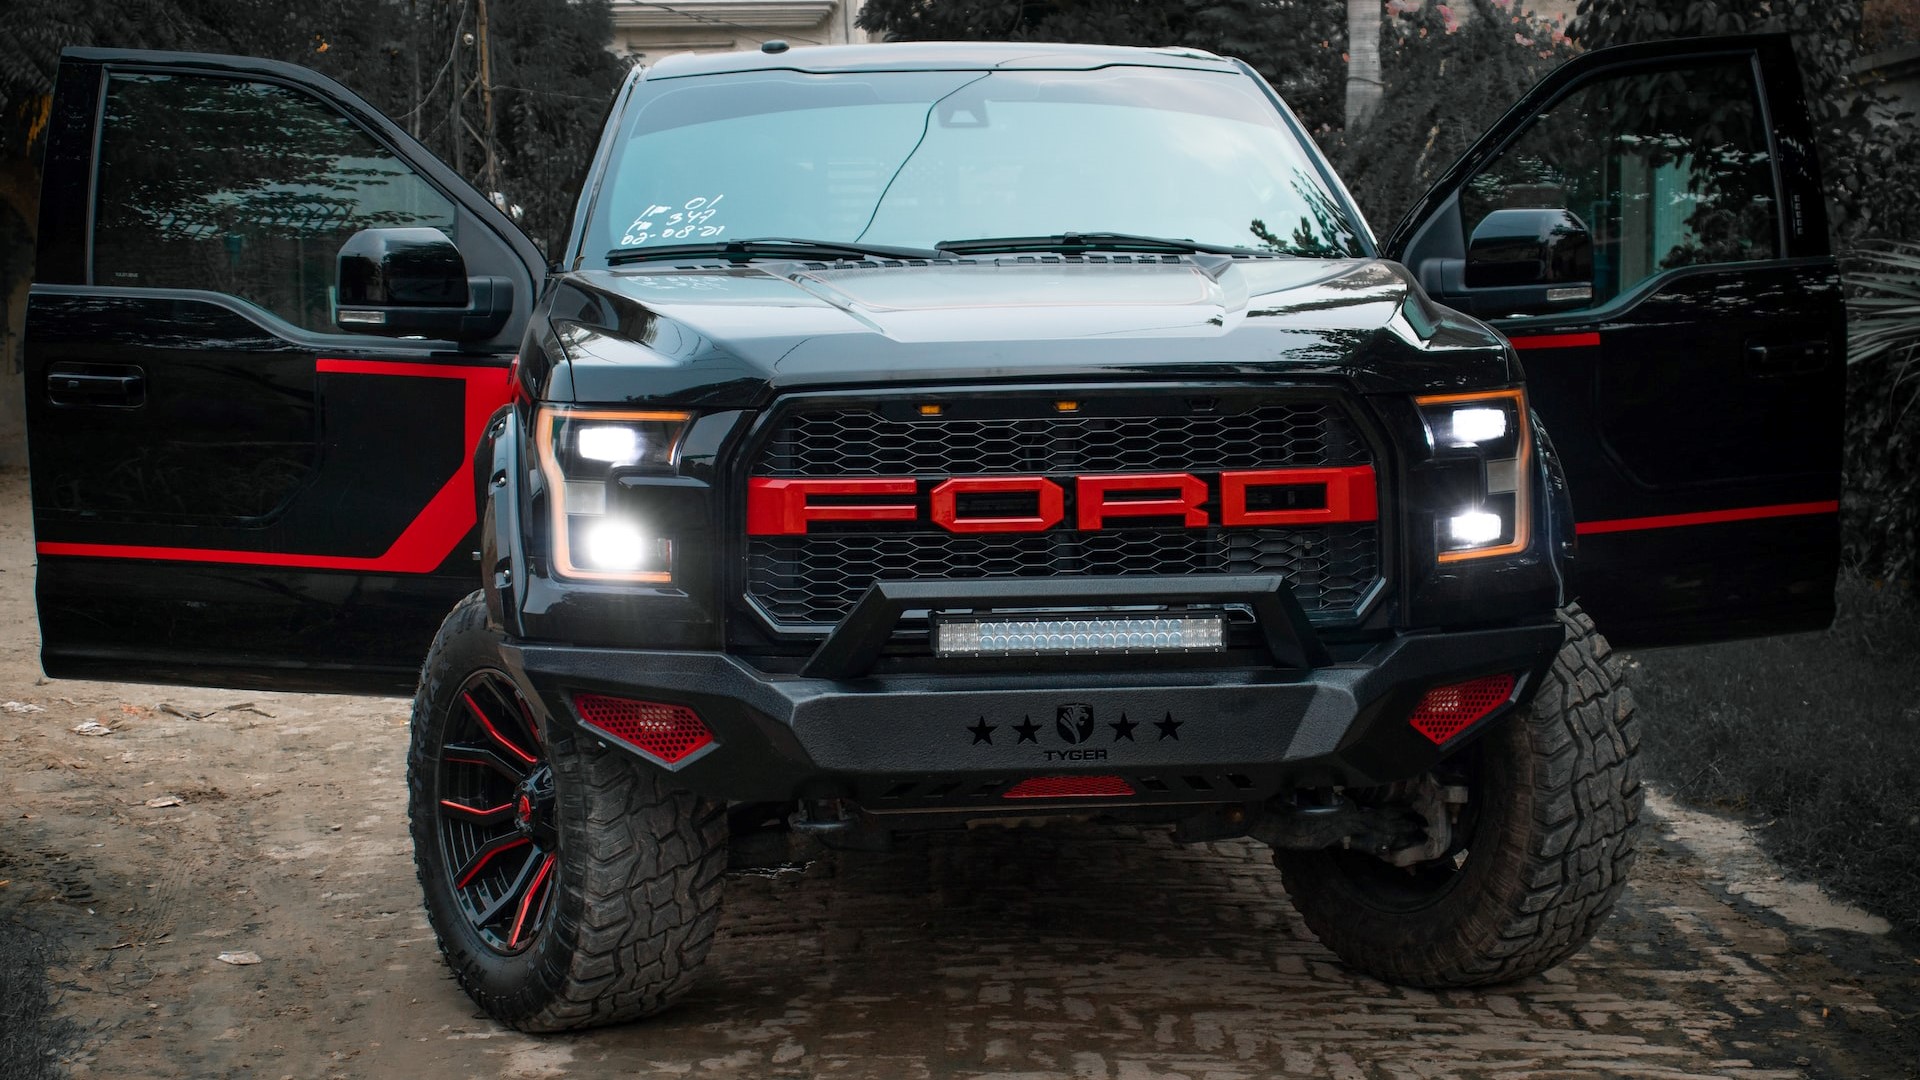 Red and Black Ford Raptor | Goodwill Car Donations